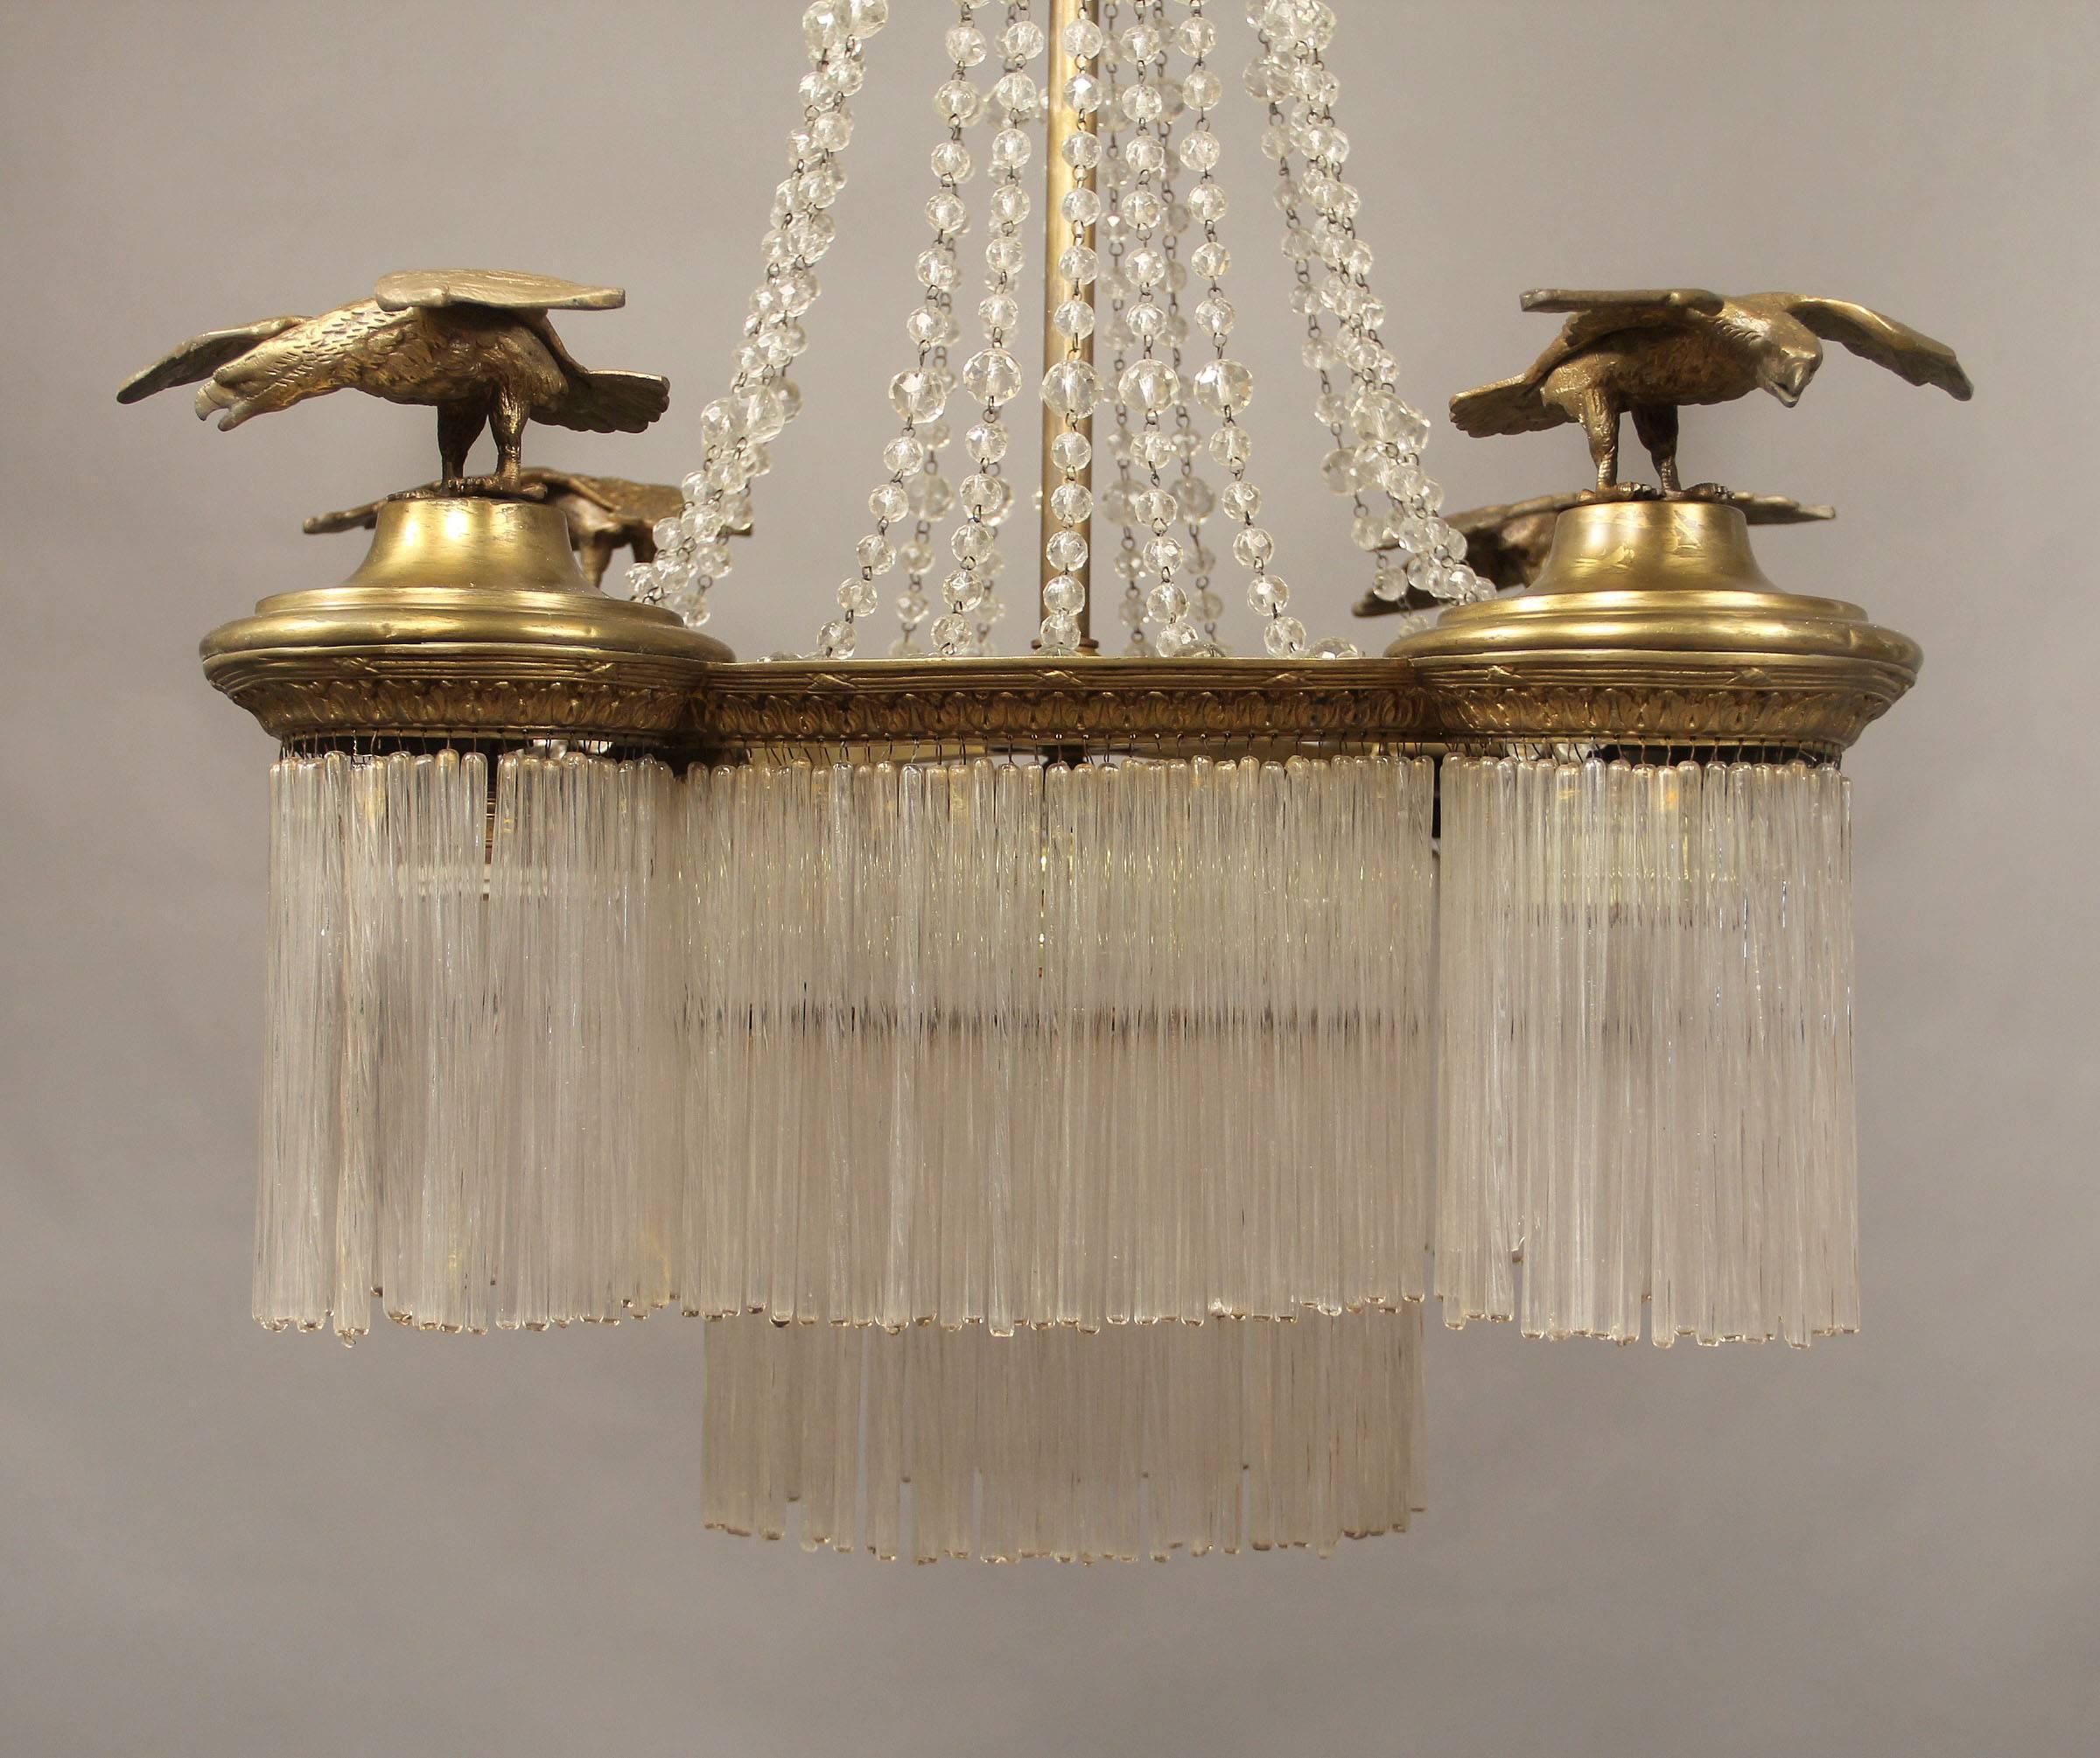 An interesting late 19th century gilt bronze and crystal five-light Empire style chandelier.

Beaded strings along the body with drop crystals, four bronze eagles adorning each corner. Five interior lights.

If you are looking for a chandelier,